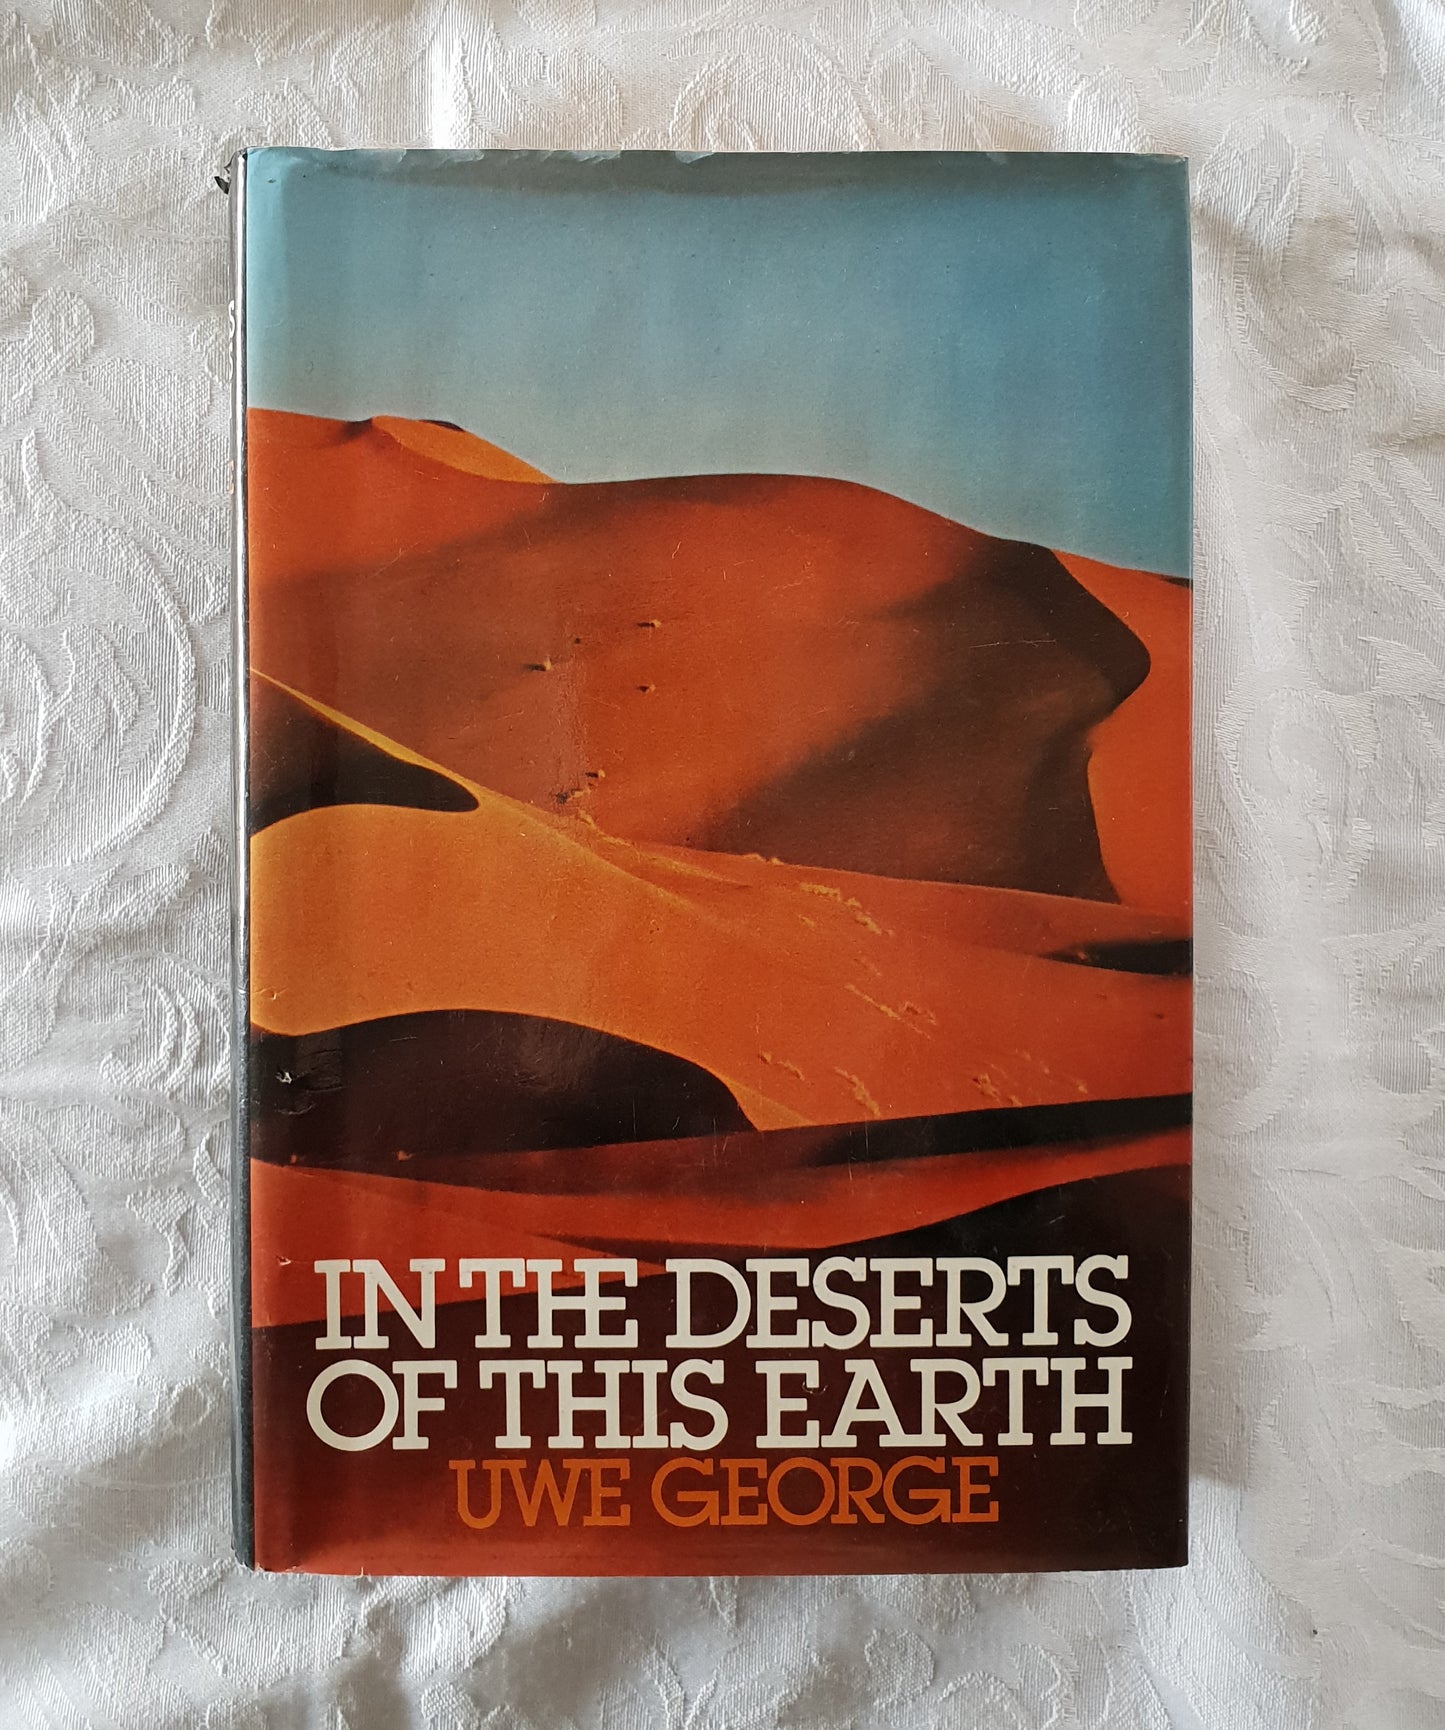 In The Deserts of This Earth by Uwe George